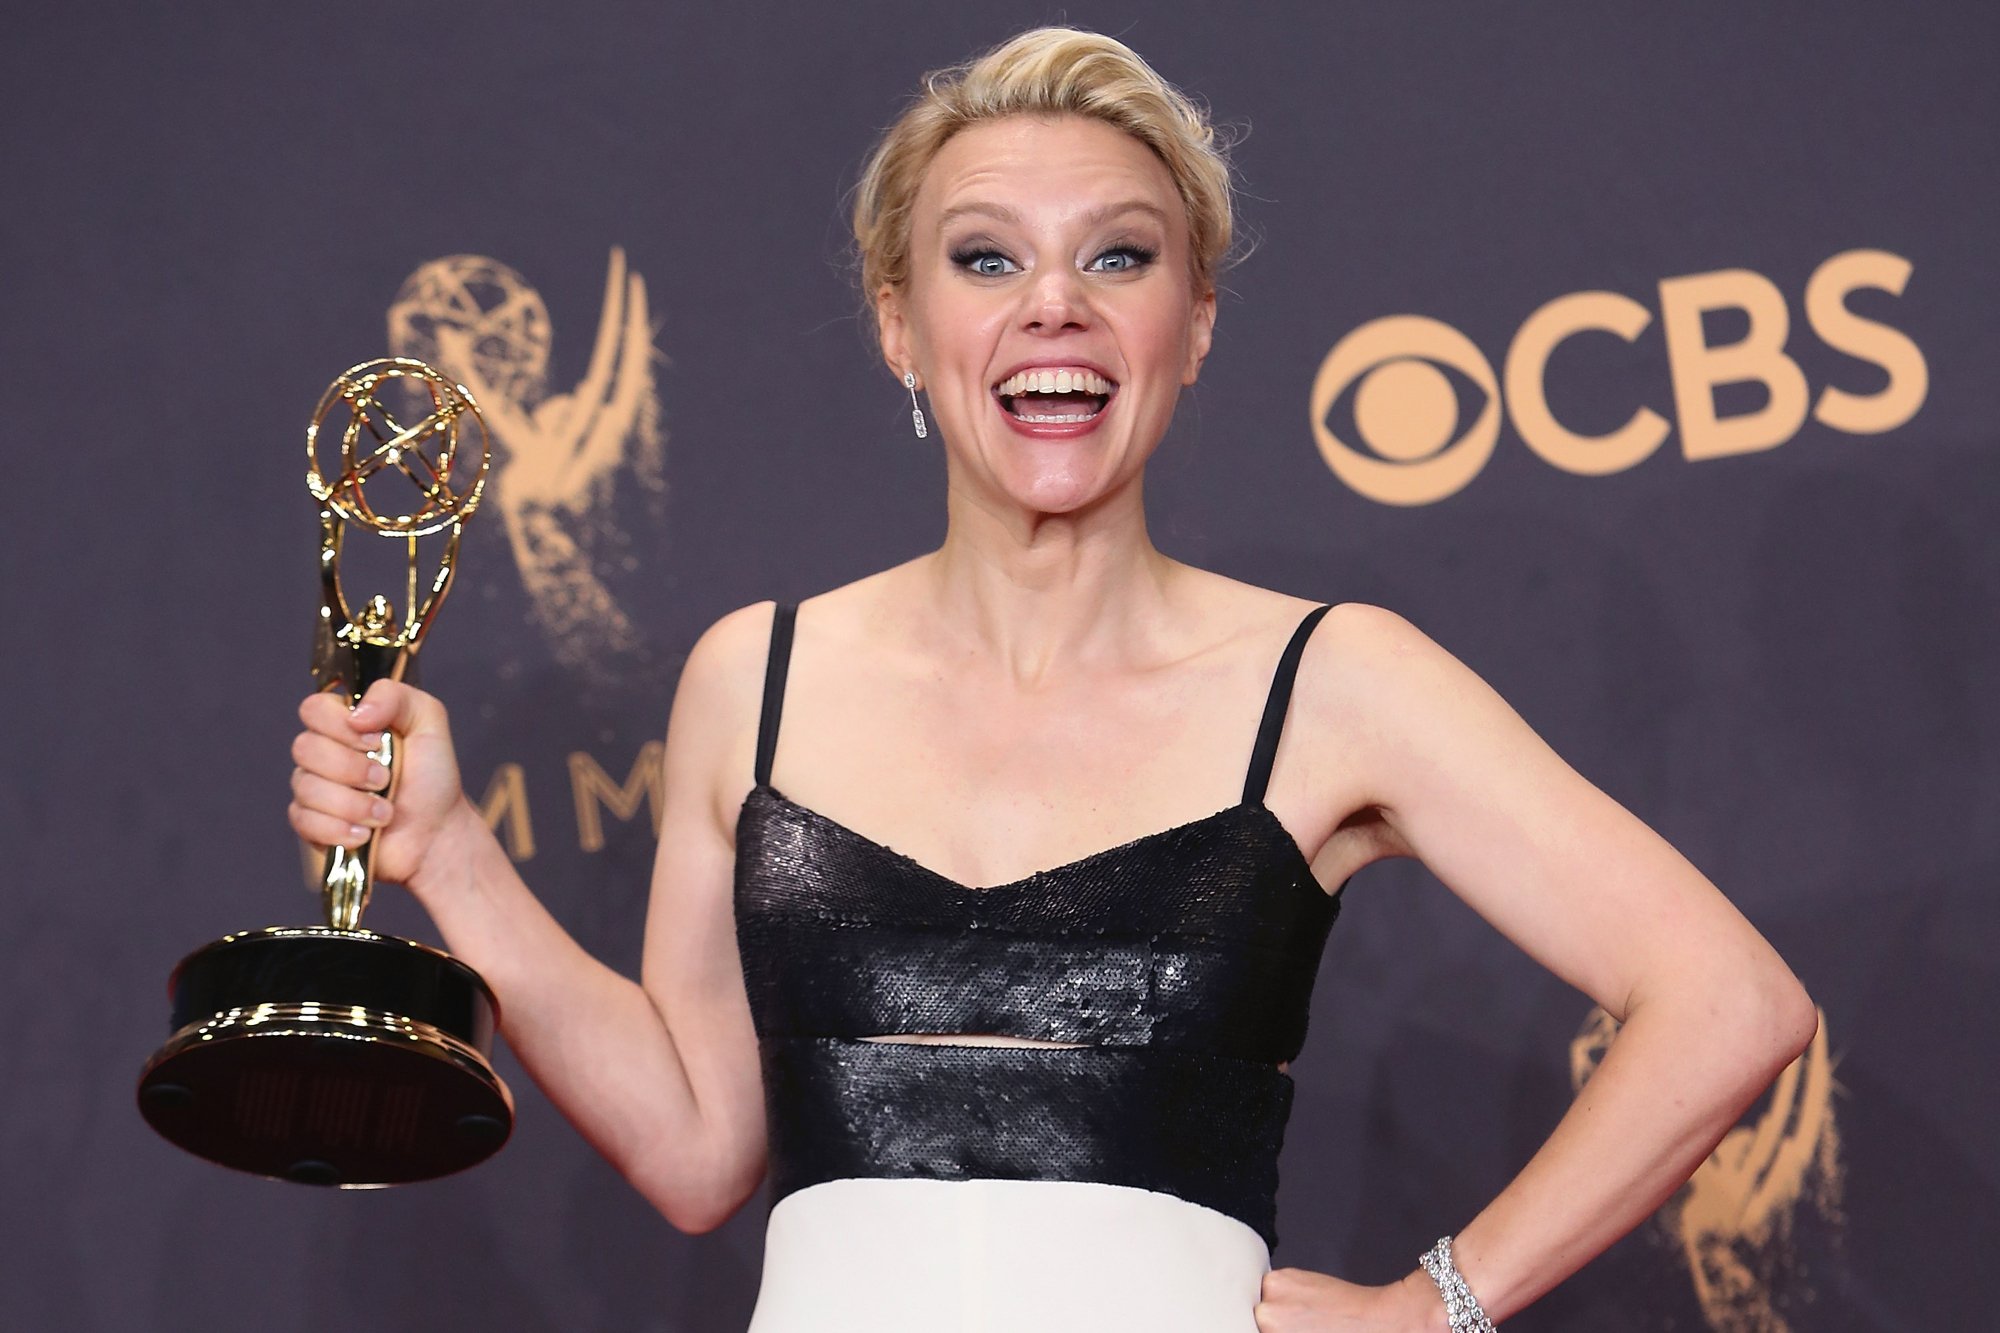 'Saturday Night Live' Kate McKinnon holding an Emmy Award wearing a black top in front of a step and repeat